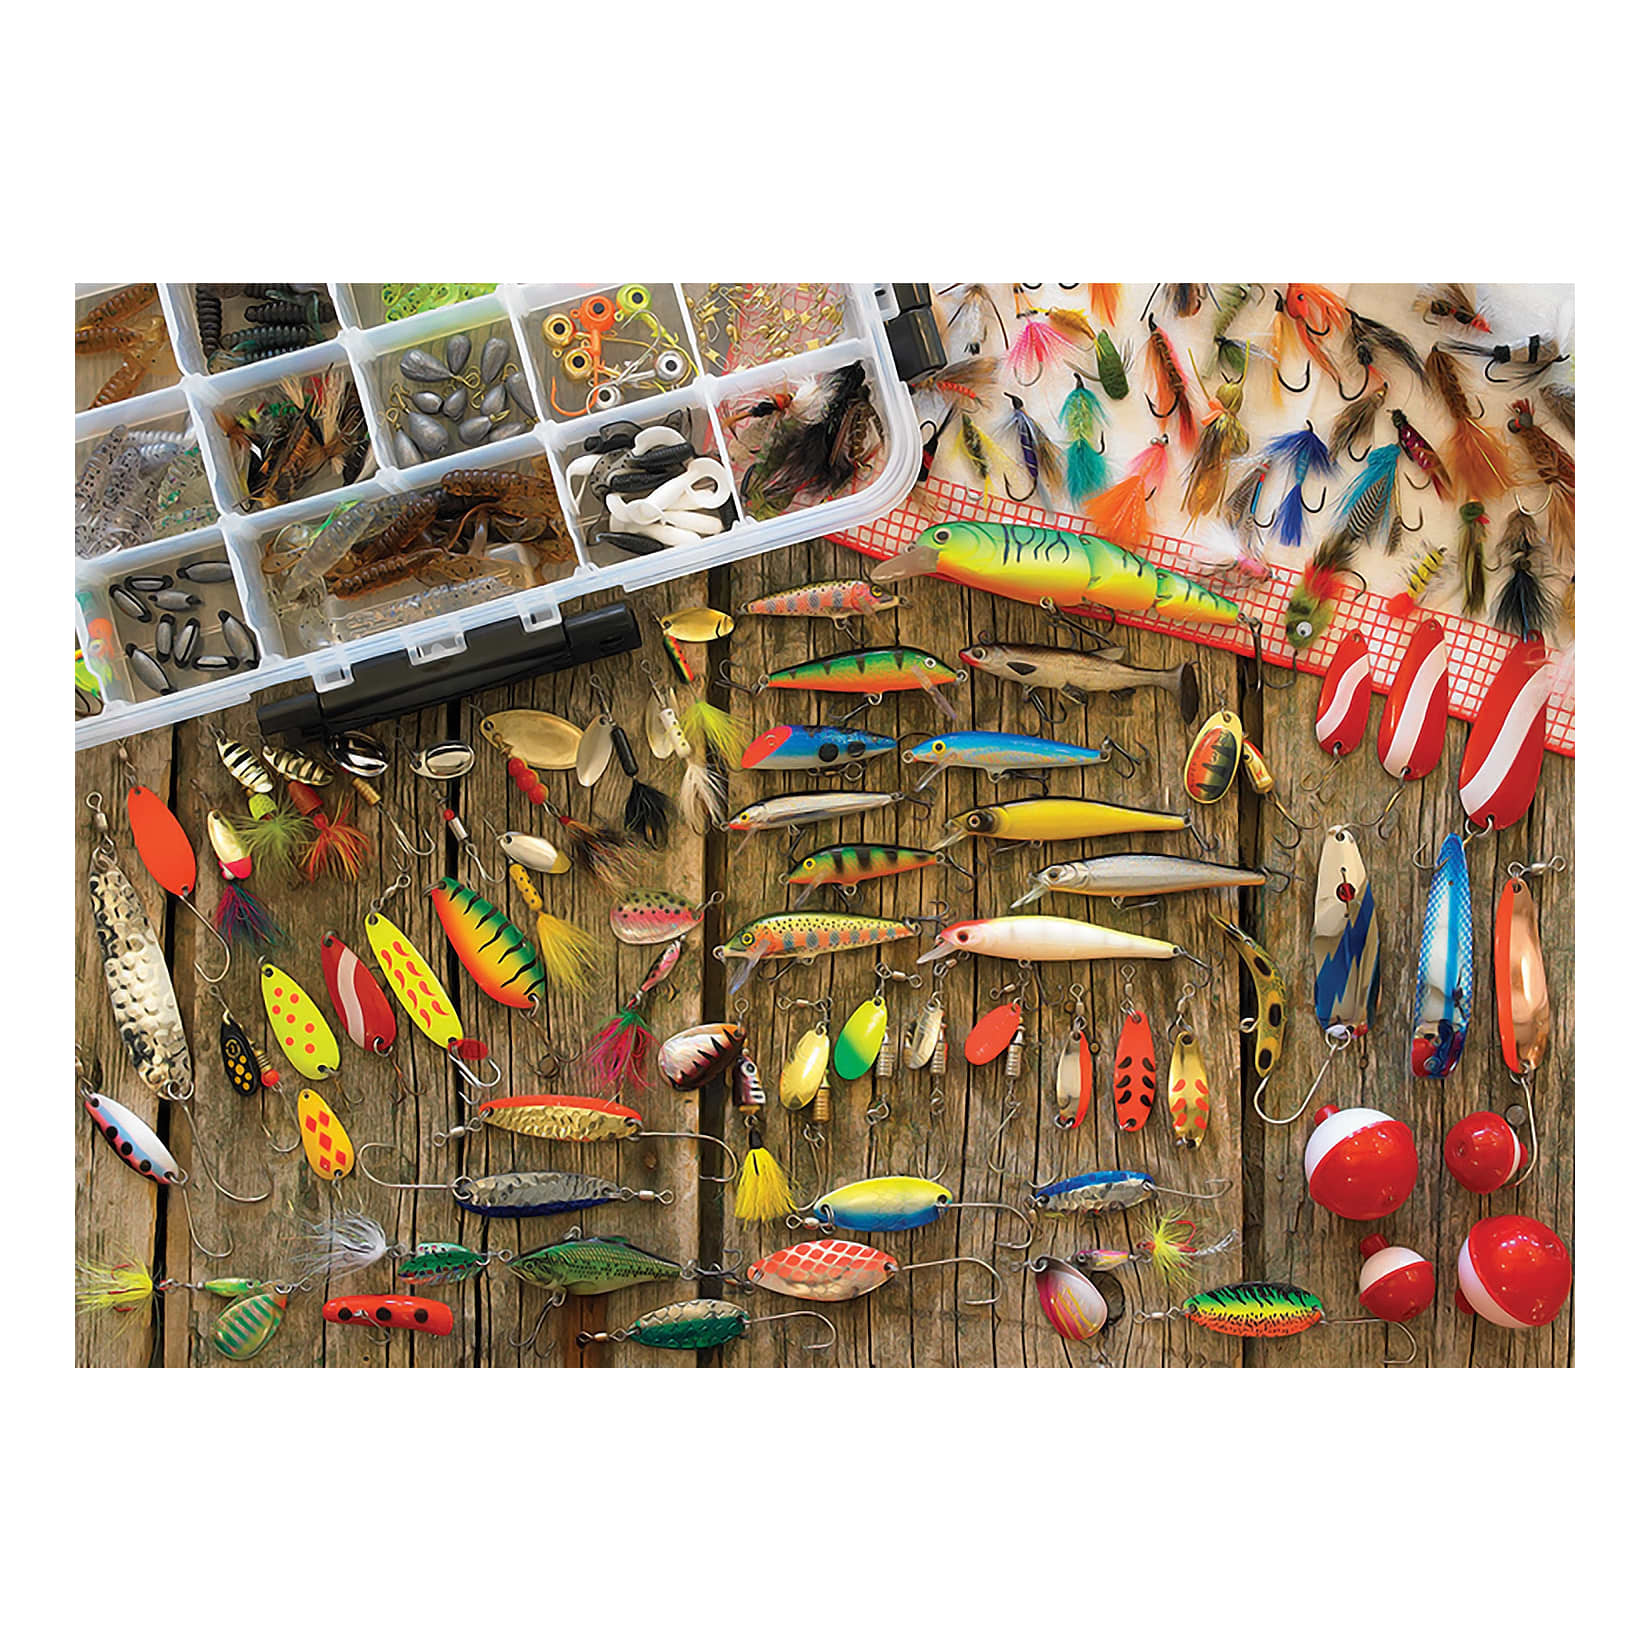 Cobble Hill Fishing Lures Puzzle - 1000 pieces - finished